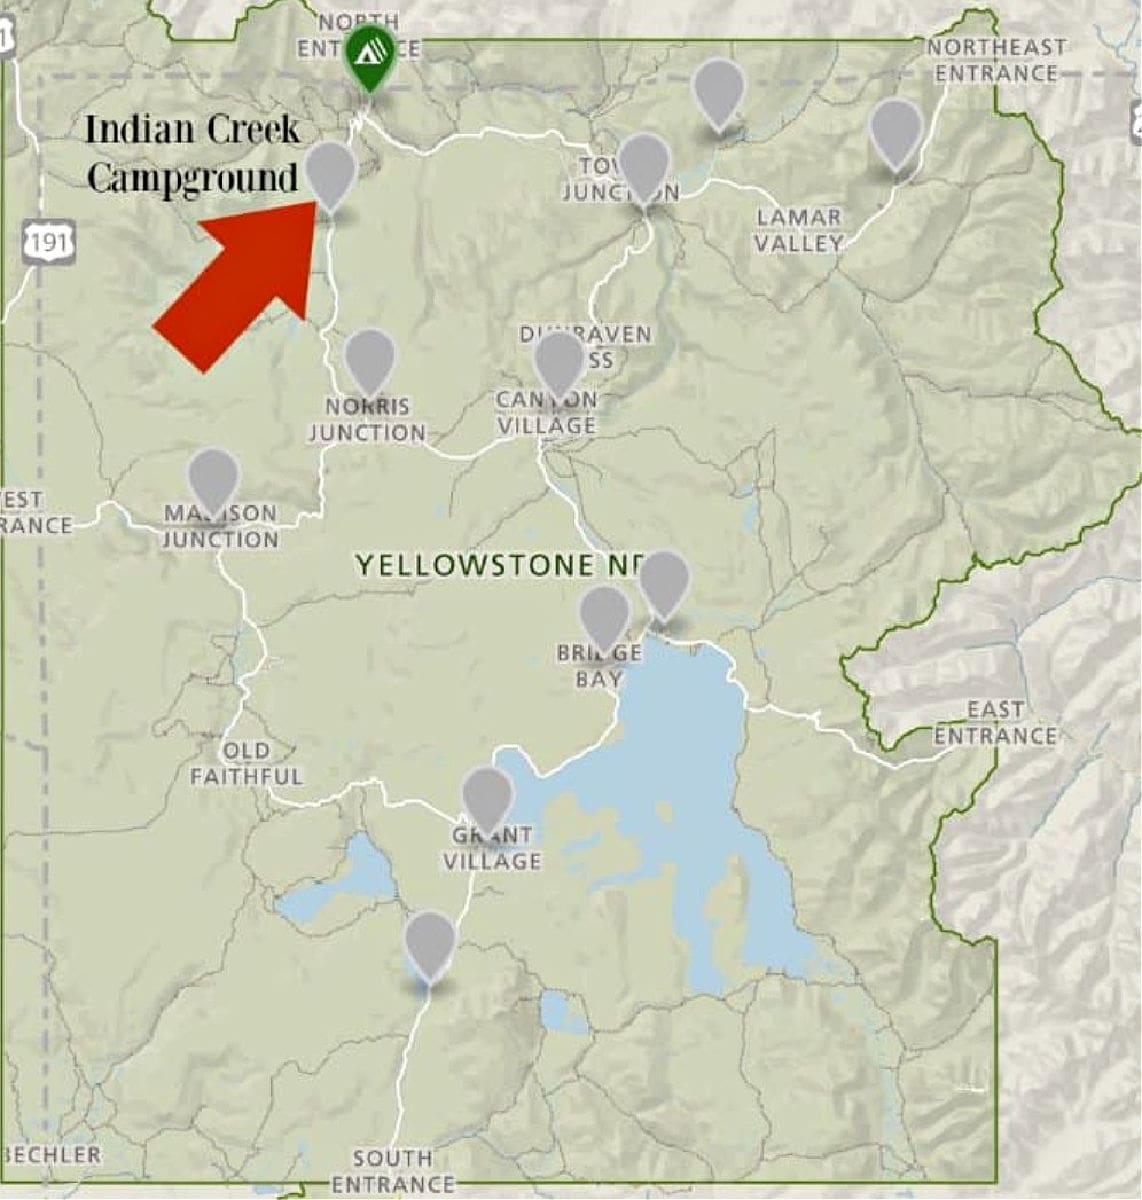 Where is Indian Creek Campground located in Yellowstone National Park